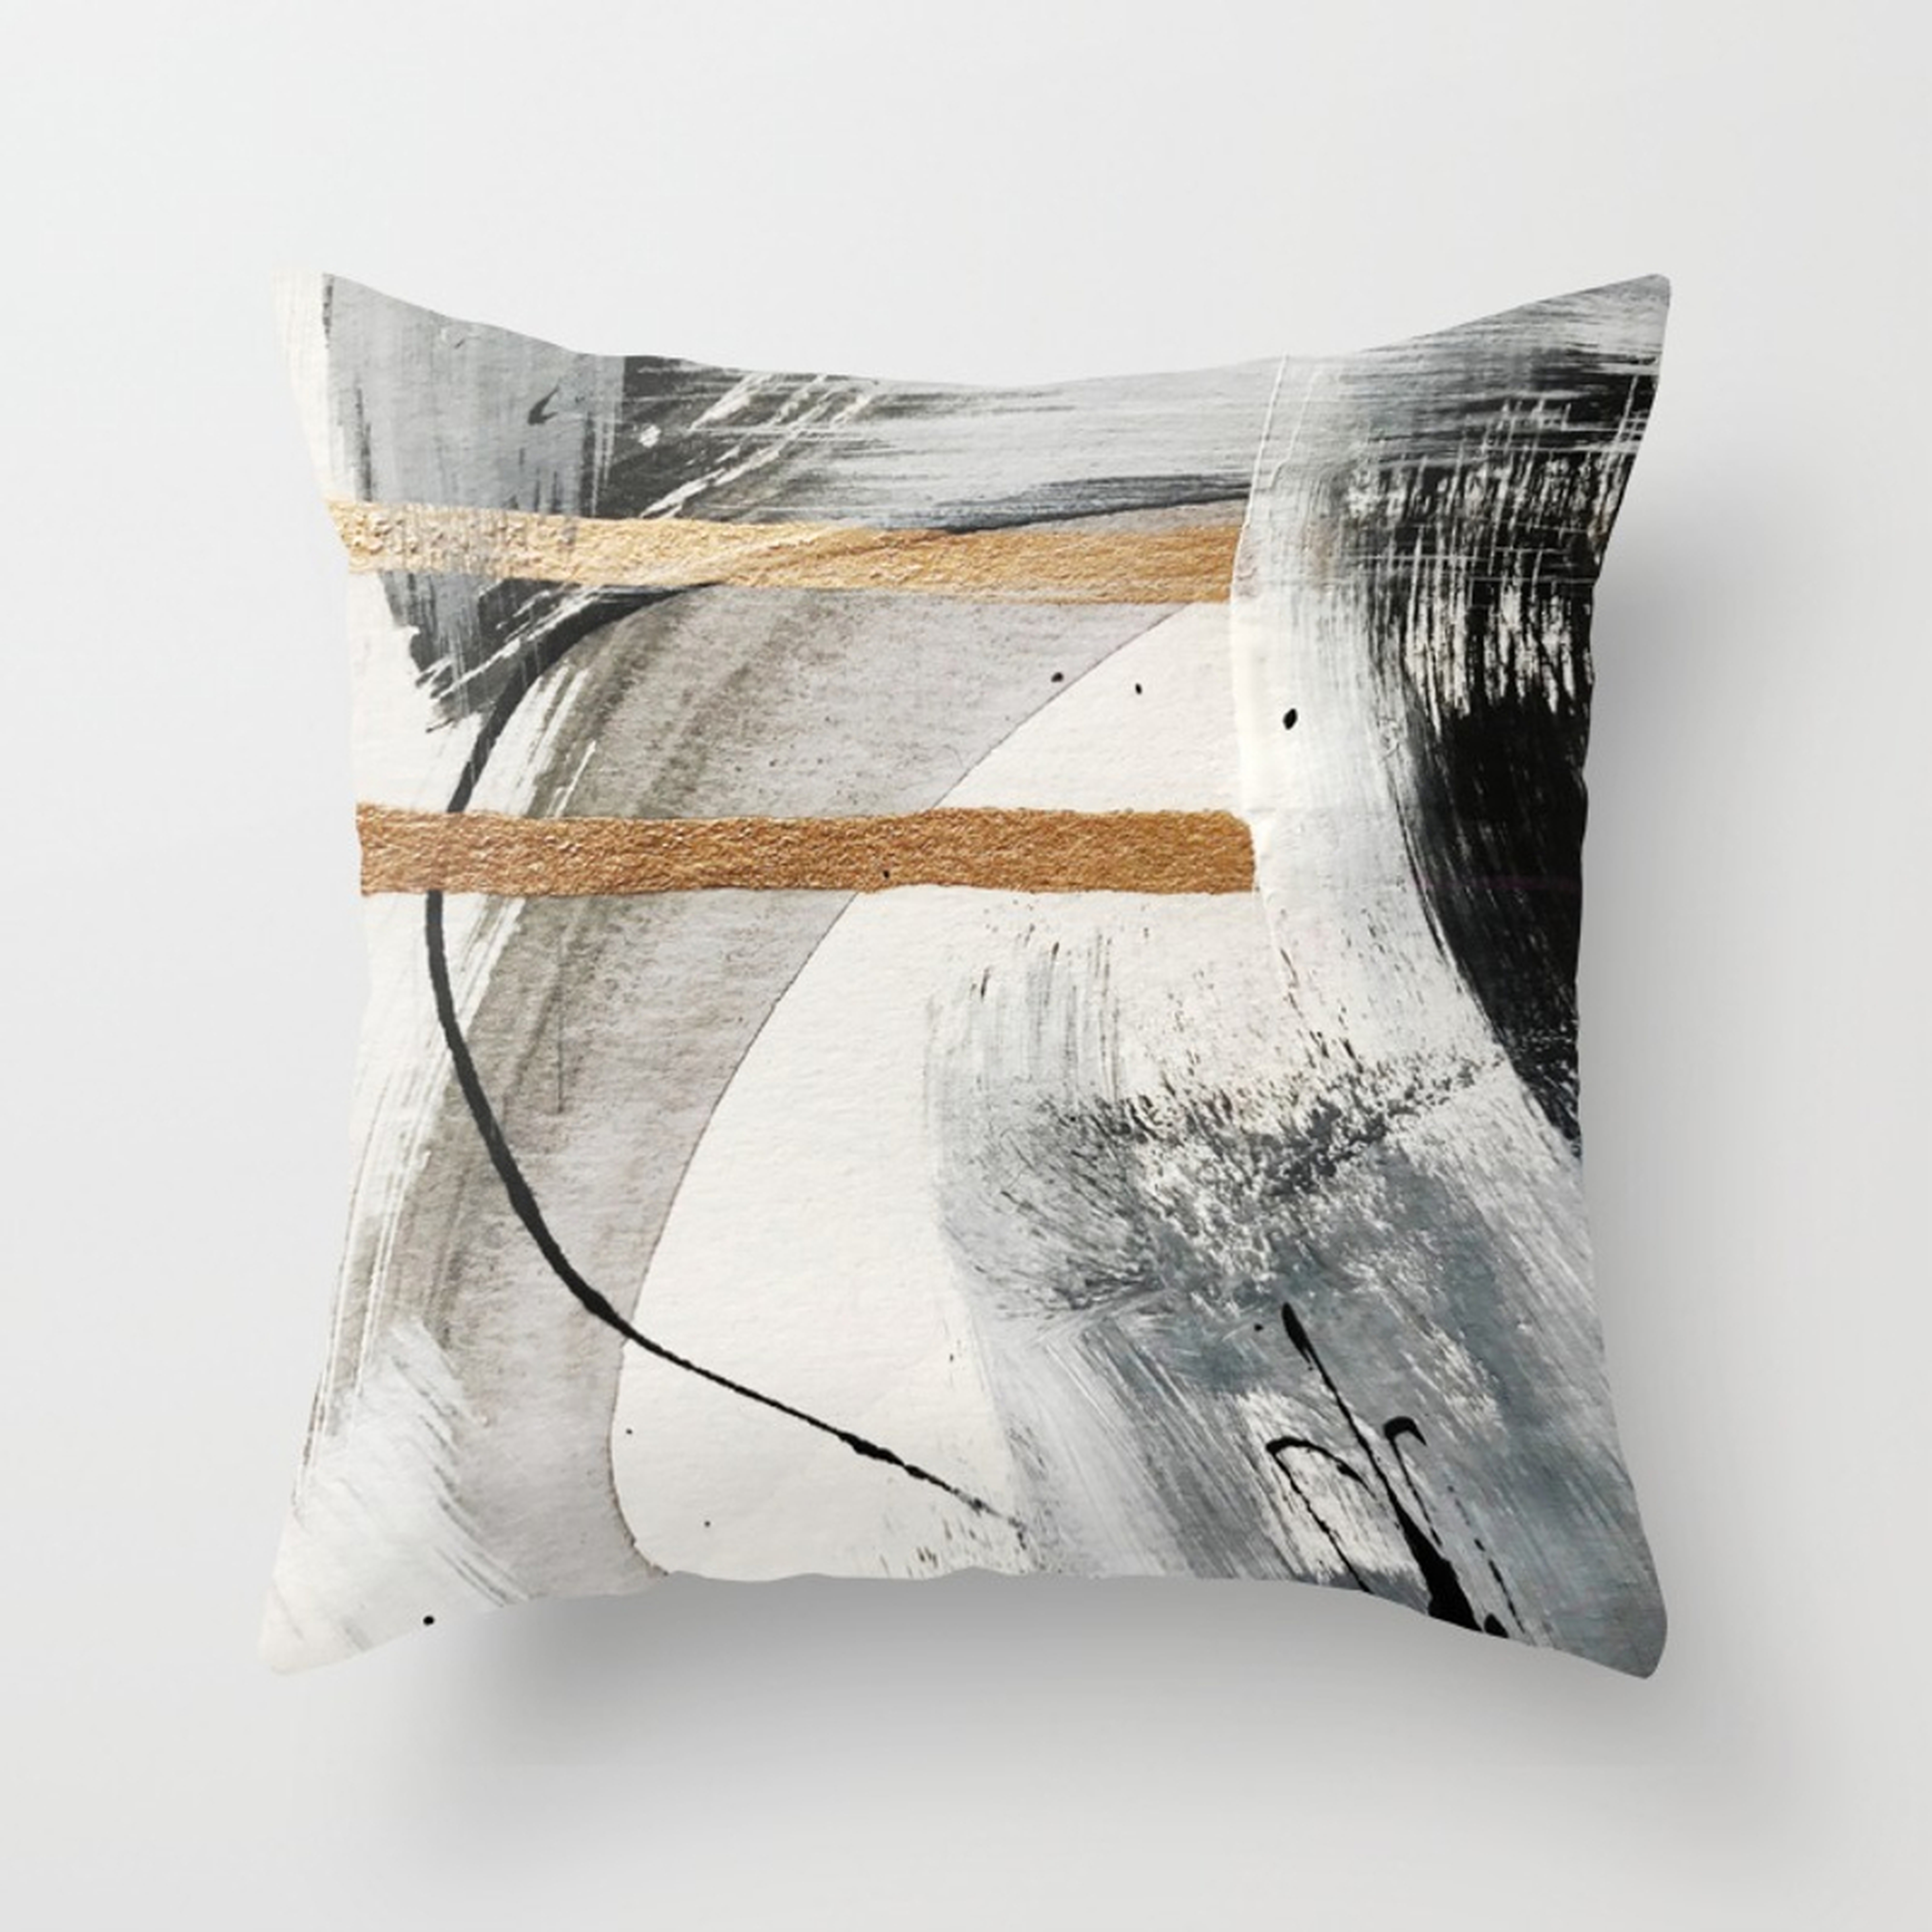 Armor [7]: a bold minimal abstract mixed media piece in gold, black and white Throw Pillow - Indoor Cover (18" x 18") with pillow insert by - Society6